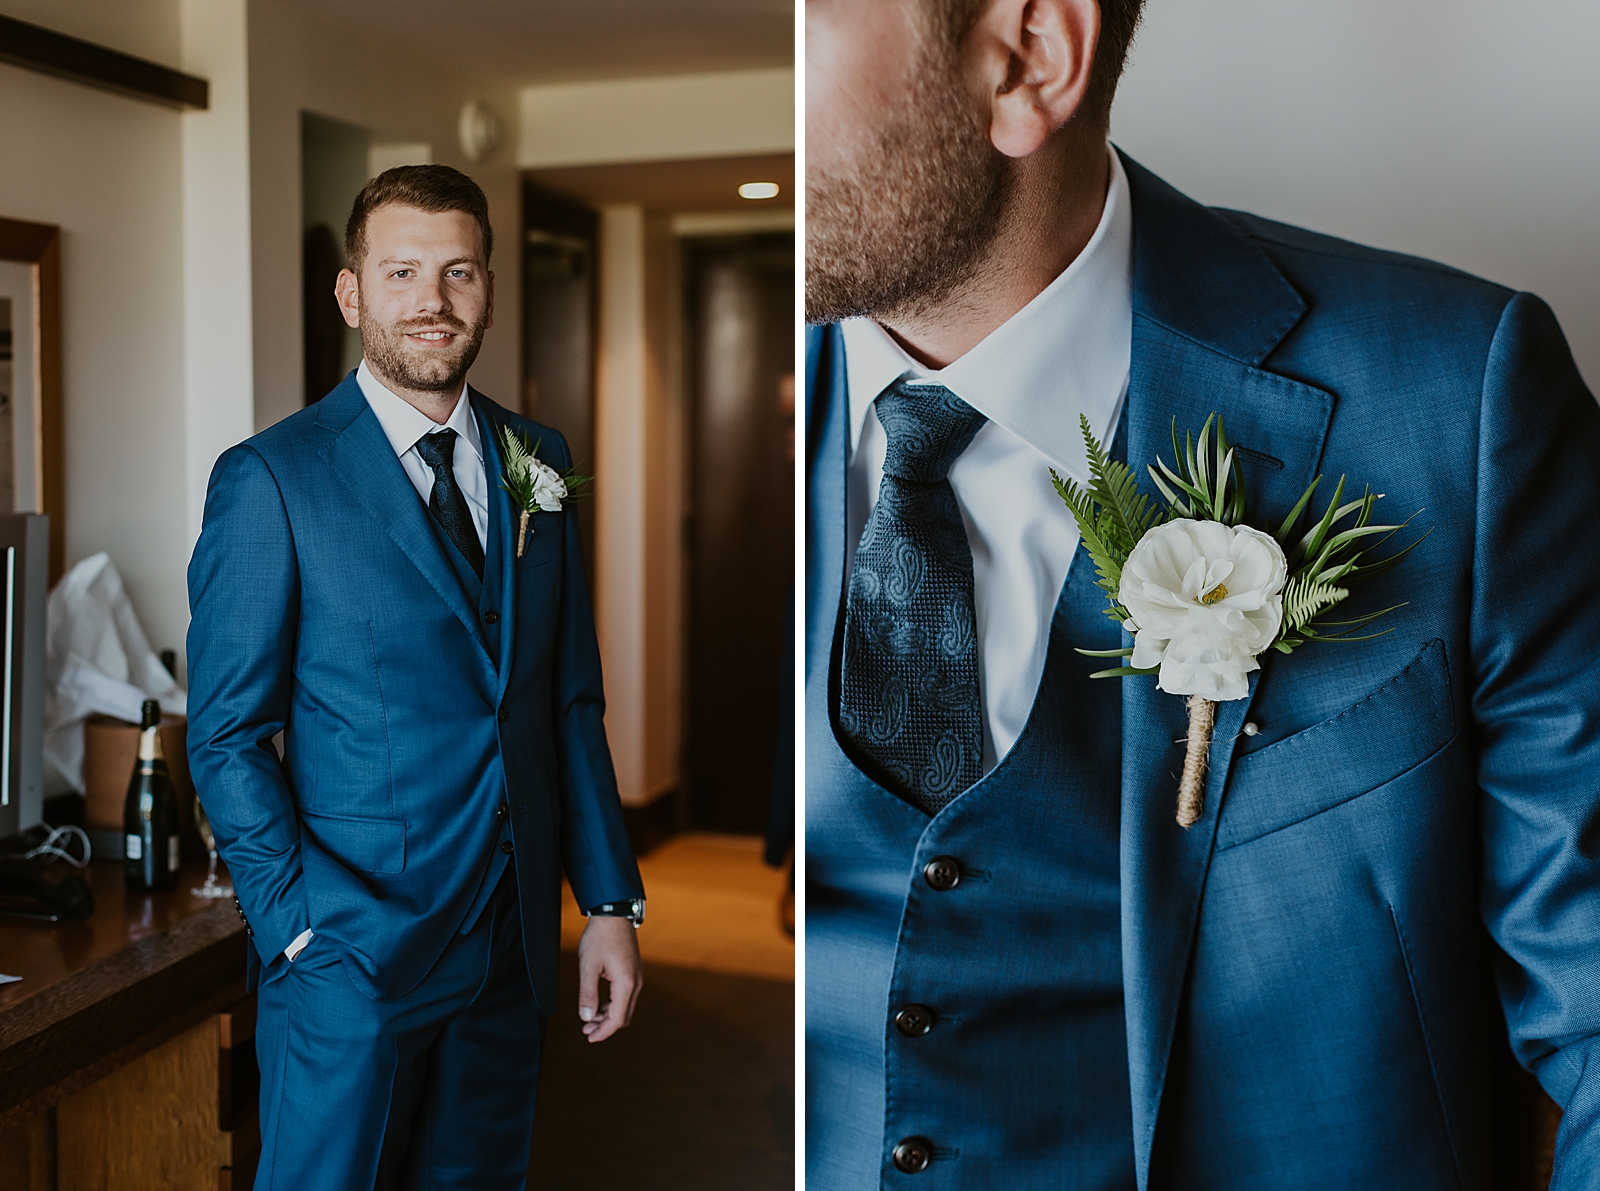 Groom after Getting Ready in Navy suit with white flower boutonniere 